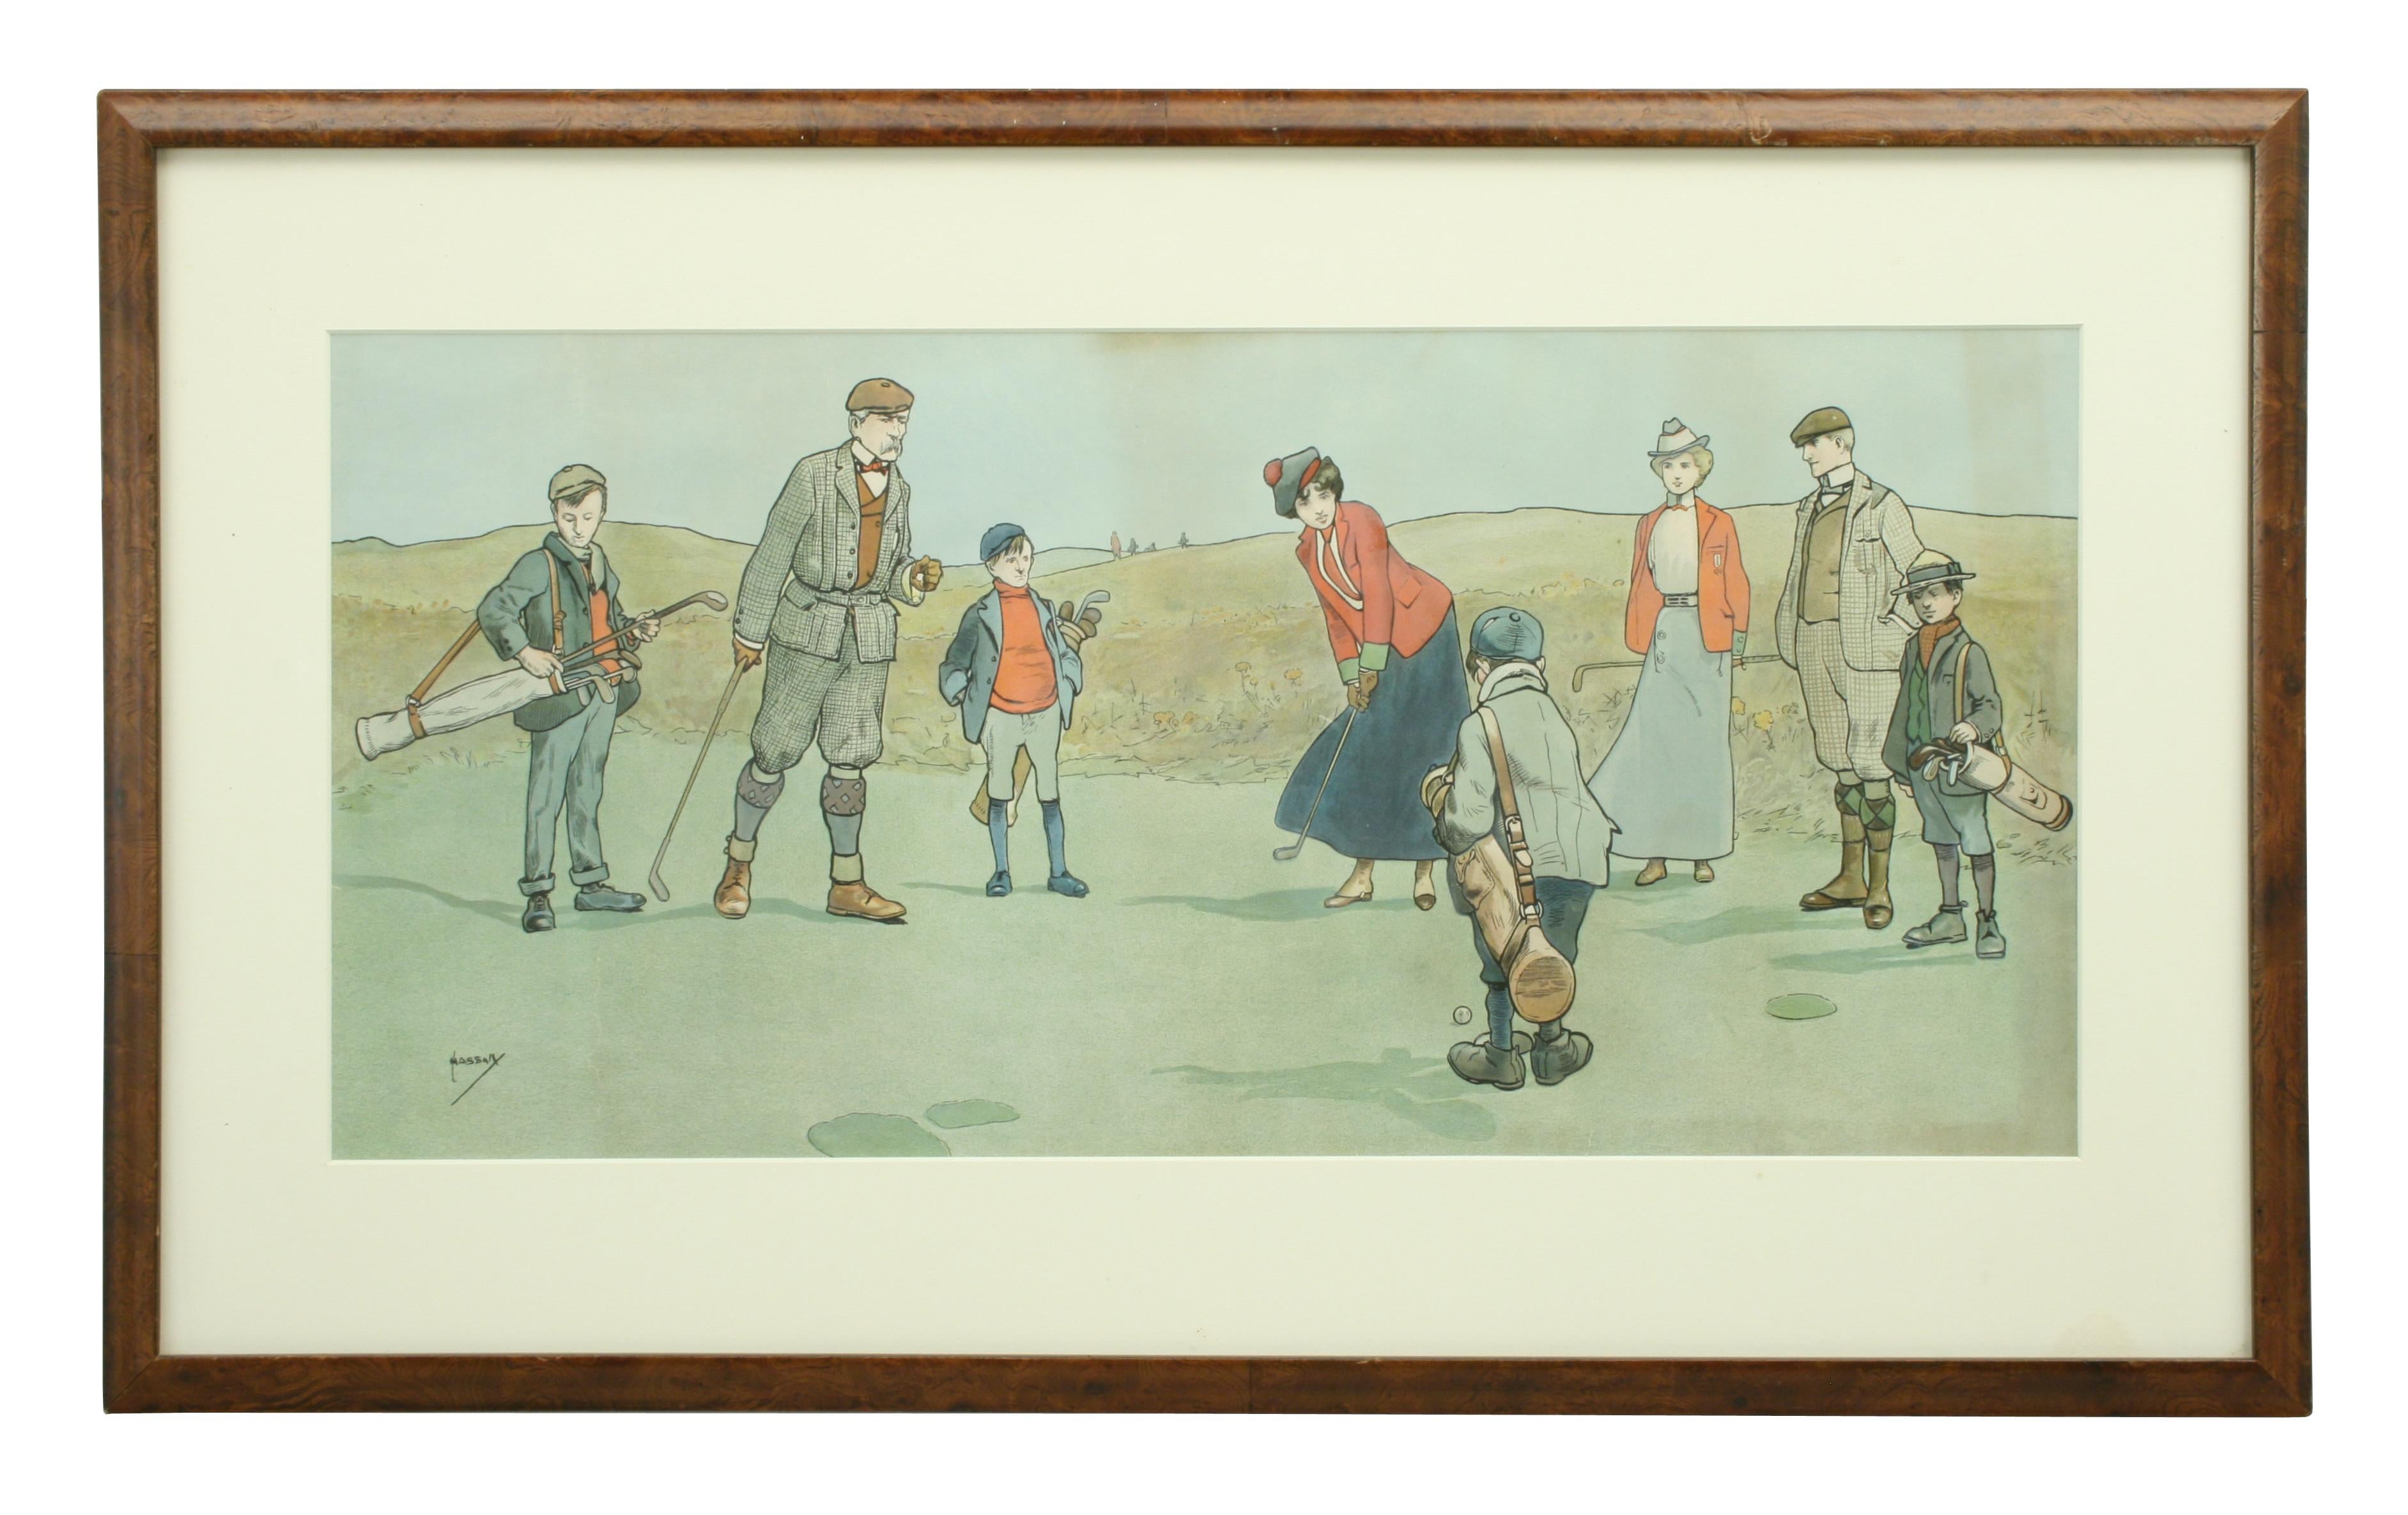 Sporting Art Vintage Golf Print, Lithograph by John Hassal, Putting Out